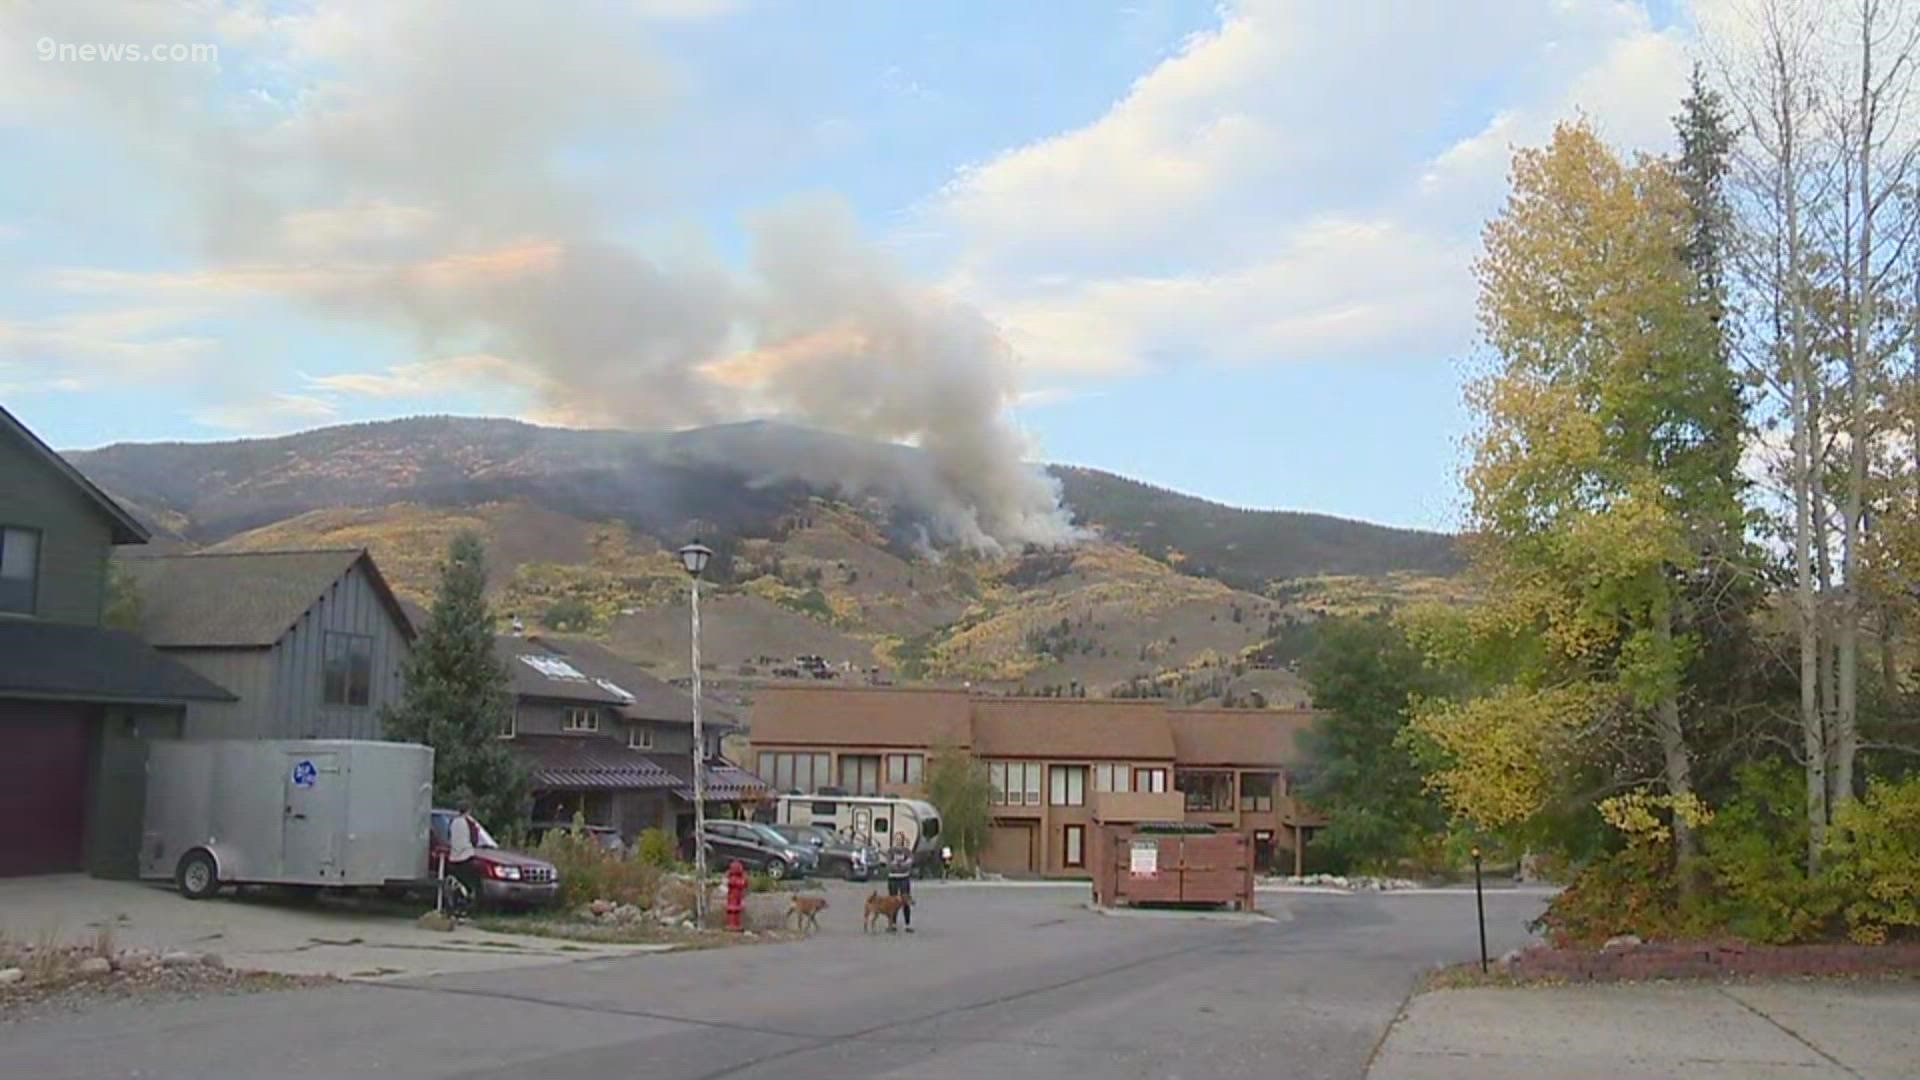 The Summit County Sheriff's Office has ordered mandatory evacuations for anyone living above Lakeview Circle near the Angler Mountain subdivision.